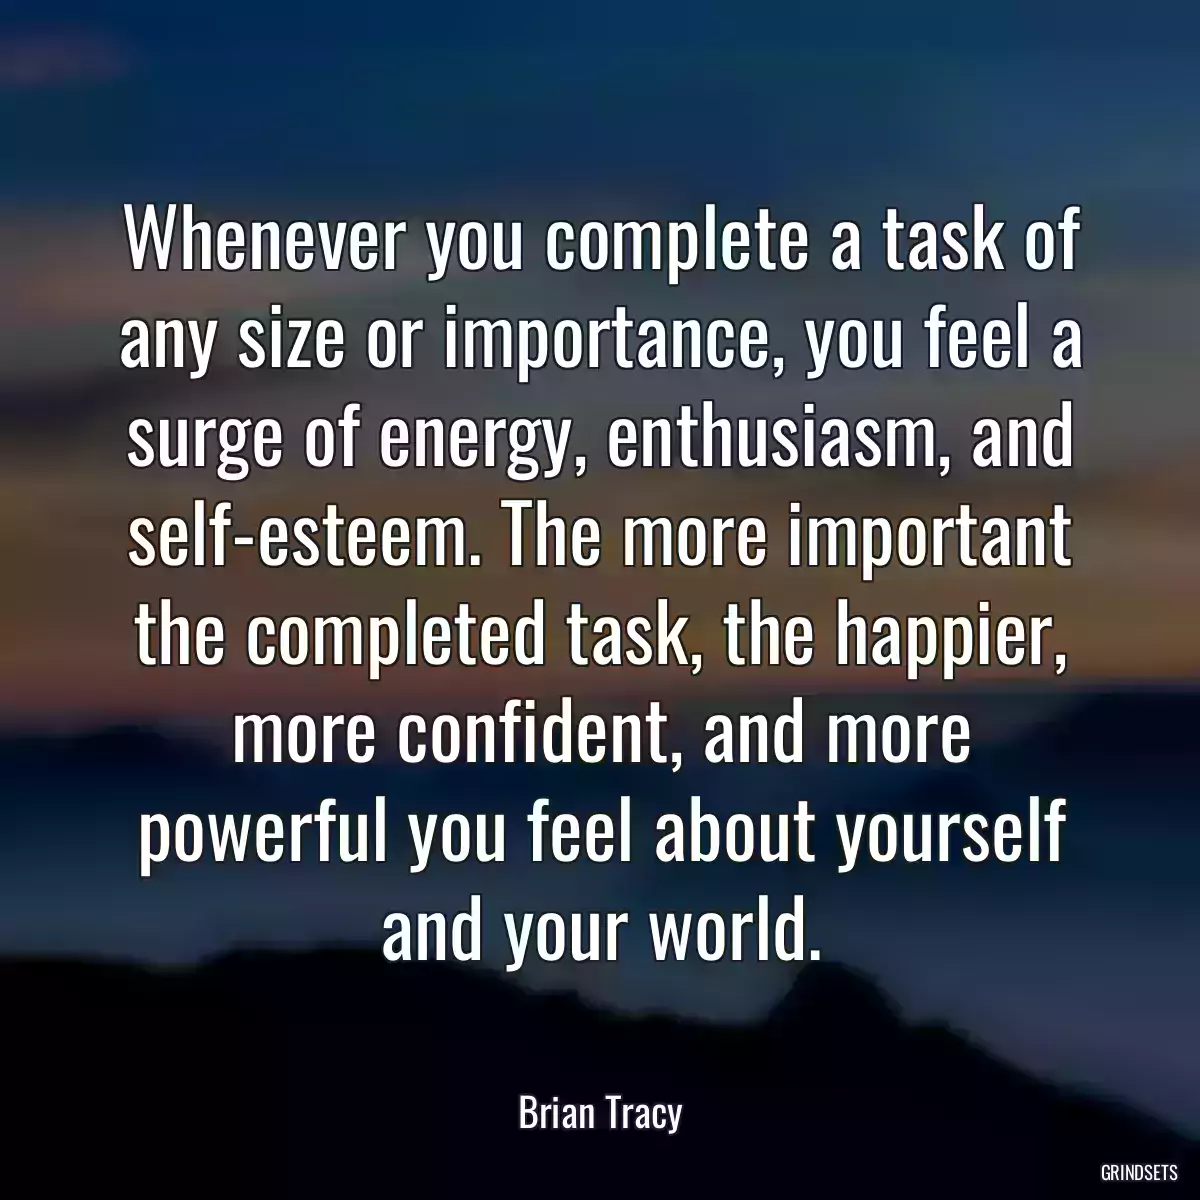 Whenever you complete a task of any size or importance, you feel a surge of energy, enthusiasm, and self-esteem. The more important the completed task, the happier, more confident, and more powerful you feel about yourself and your world.